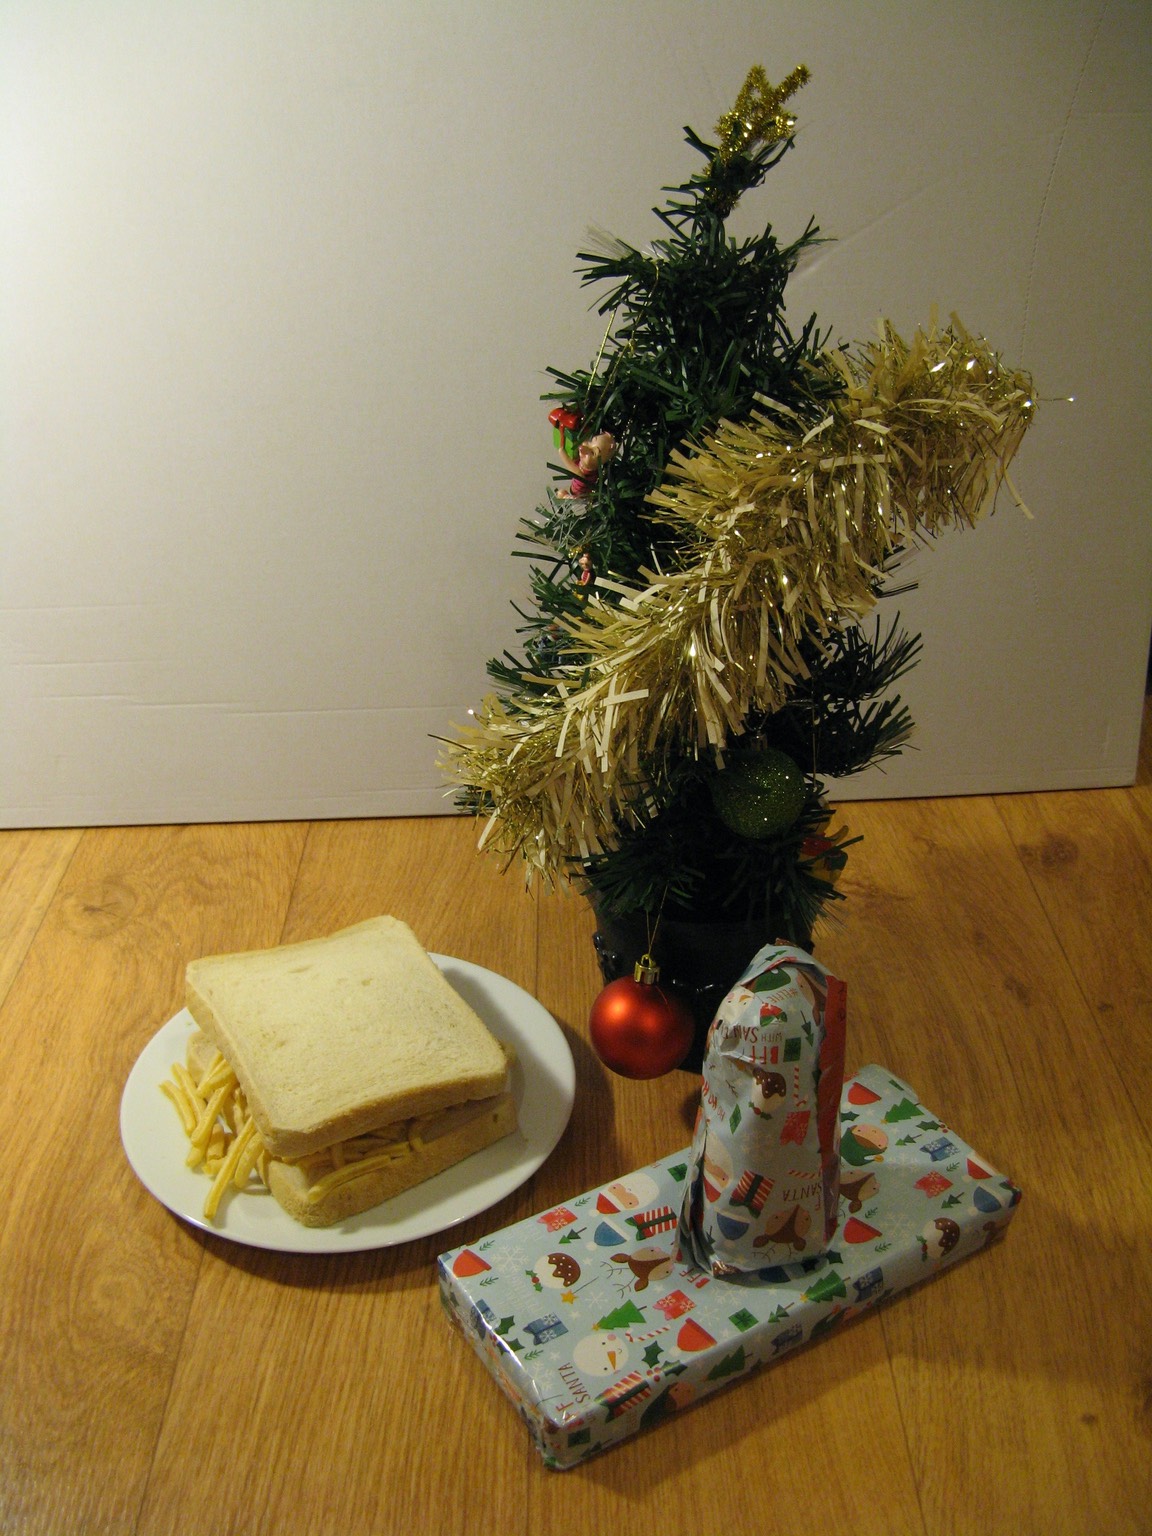 French Fries sandwich with Christmas tree and gifts